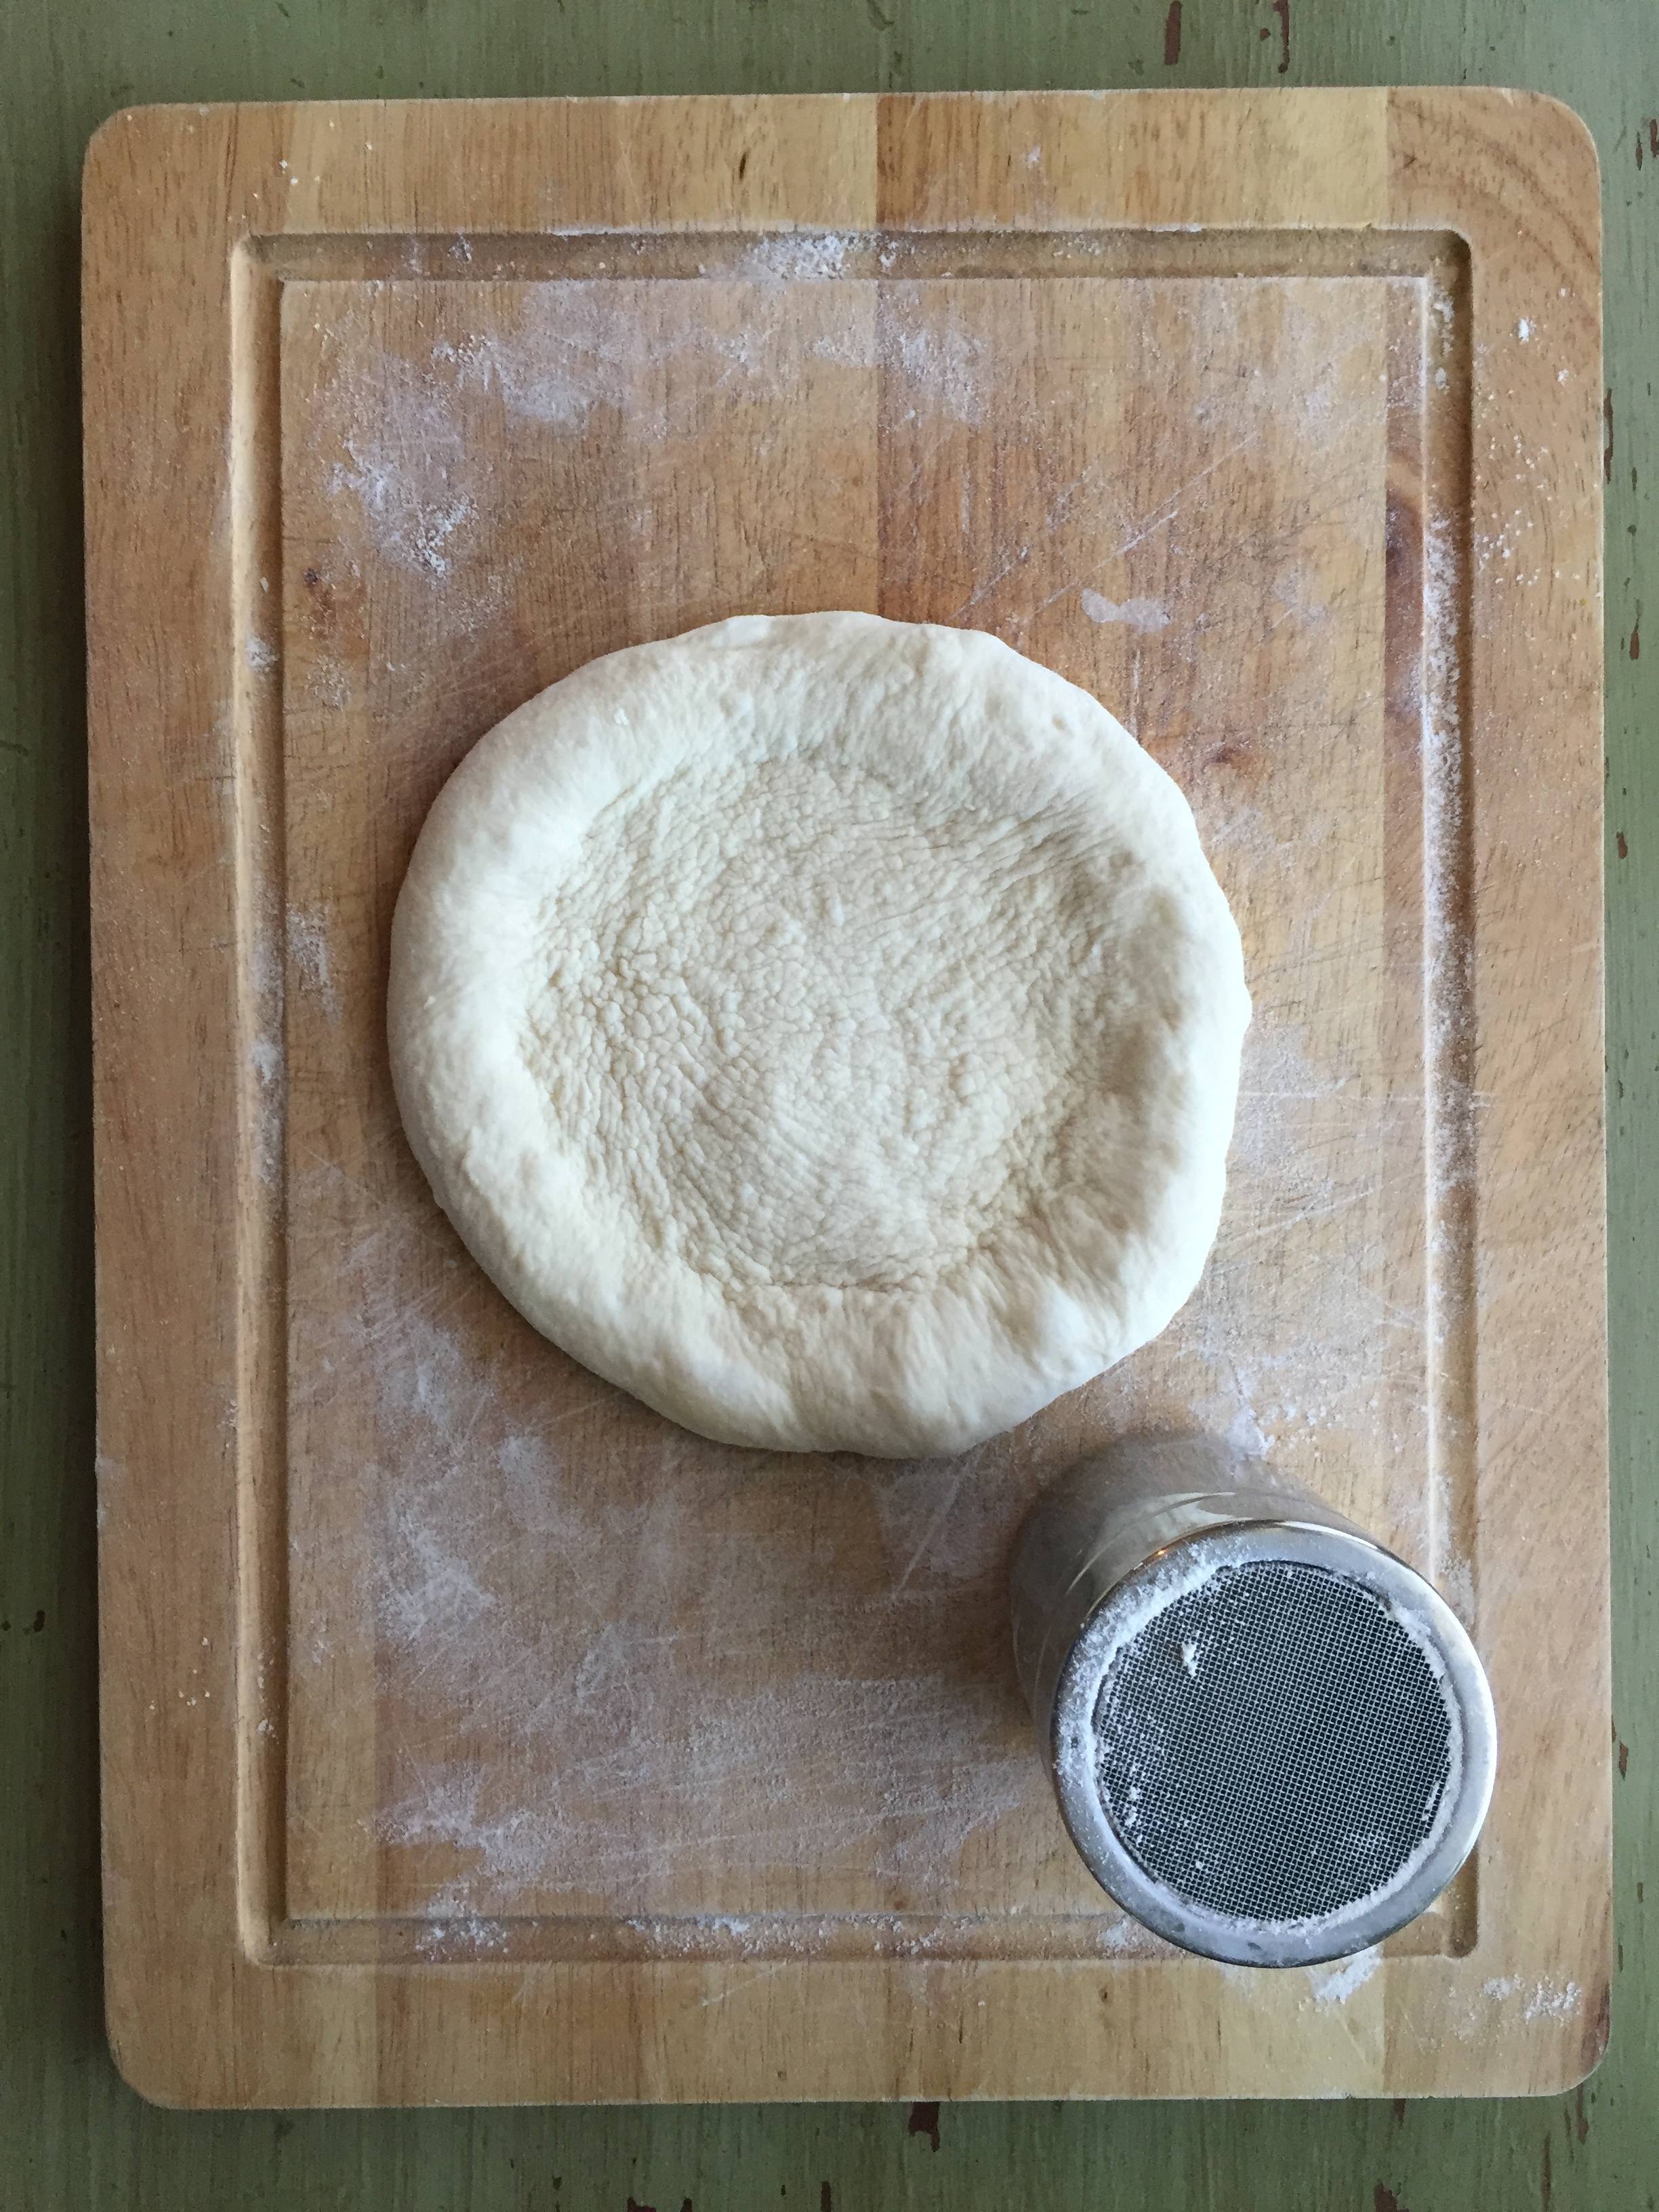  Shaped pizza dough ready for toppings! This dough will stretch out even more after after a few minutes rest.  